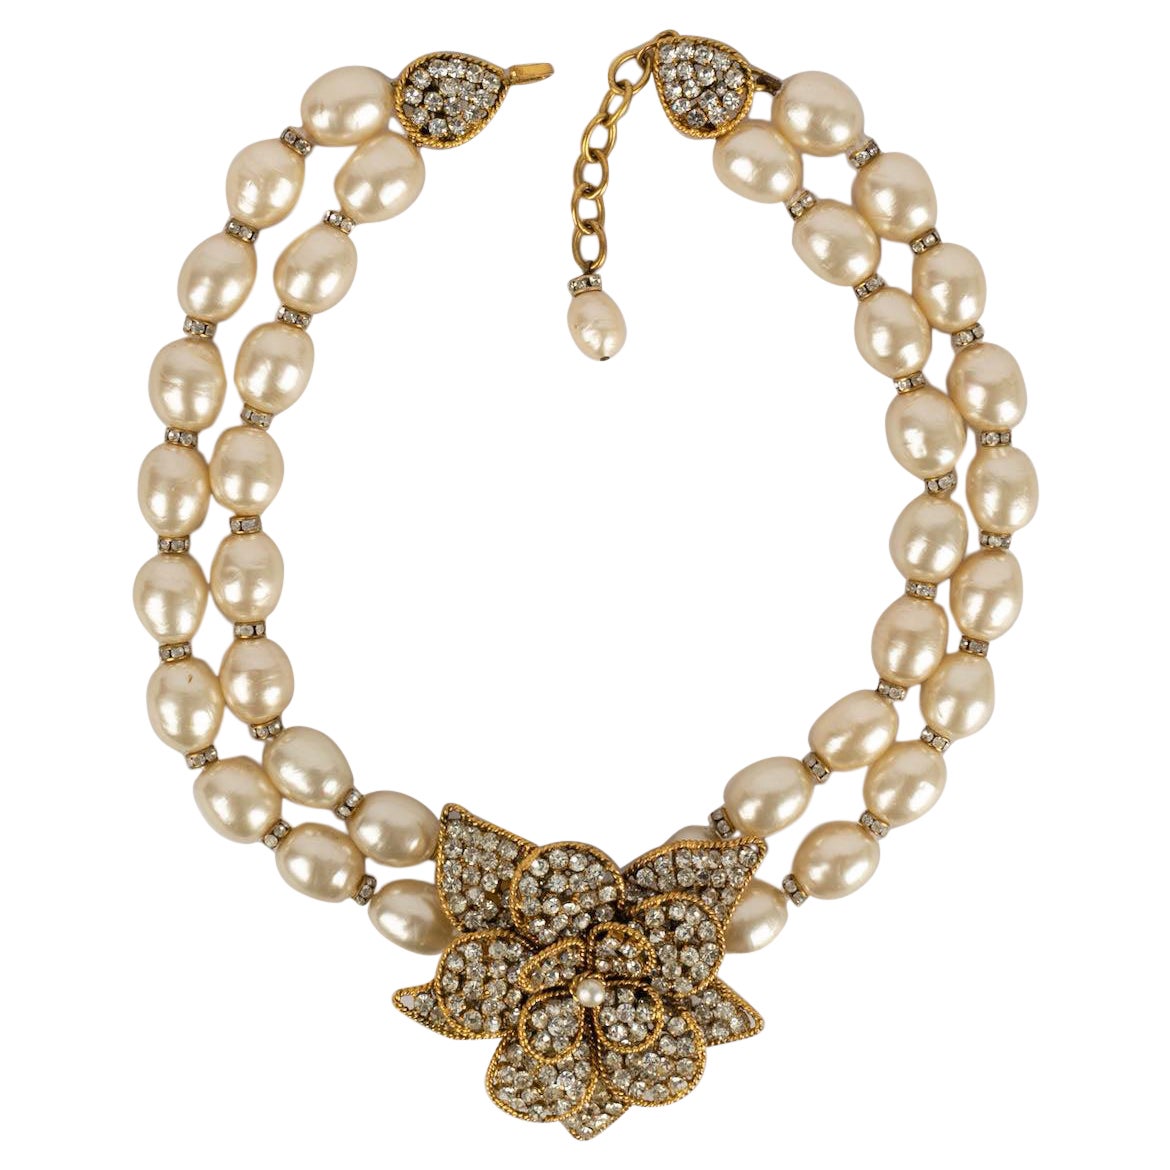 Chanel Pearls and Rhinestones Camellia Necklace